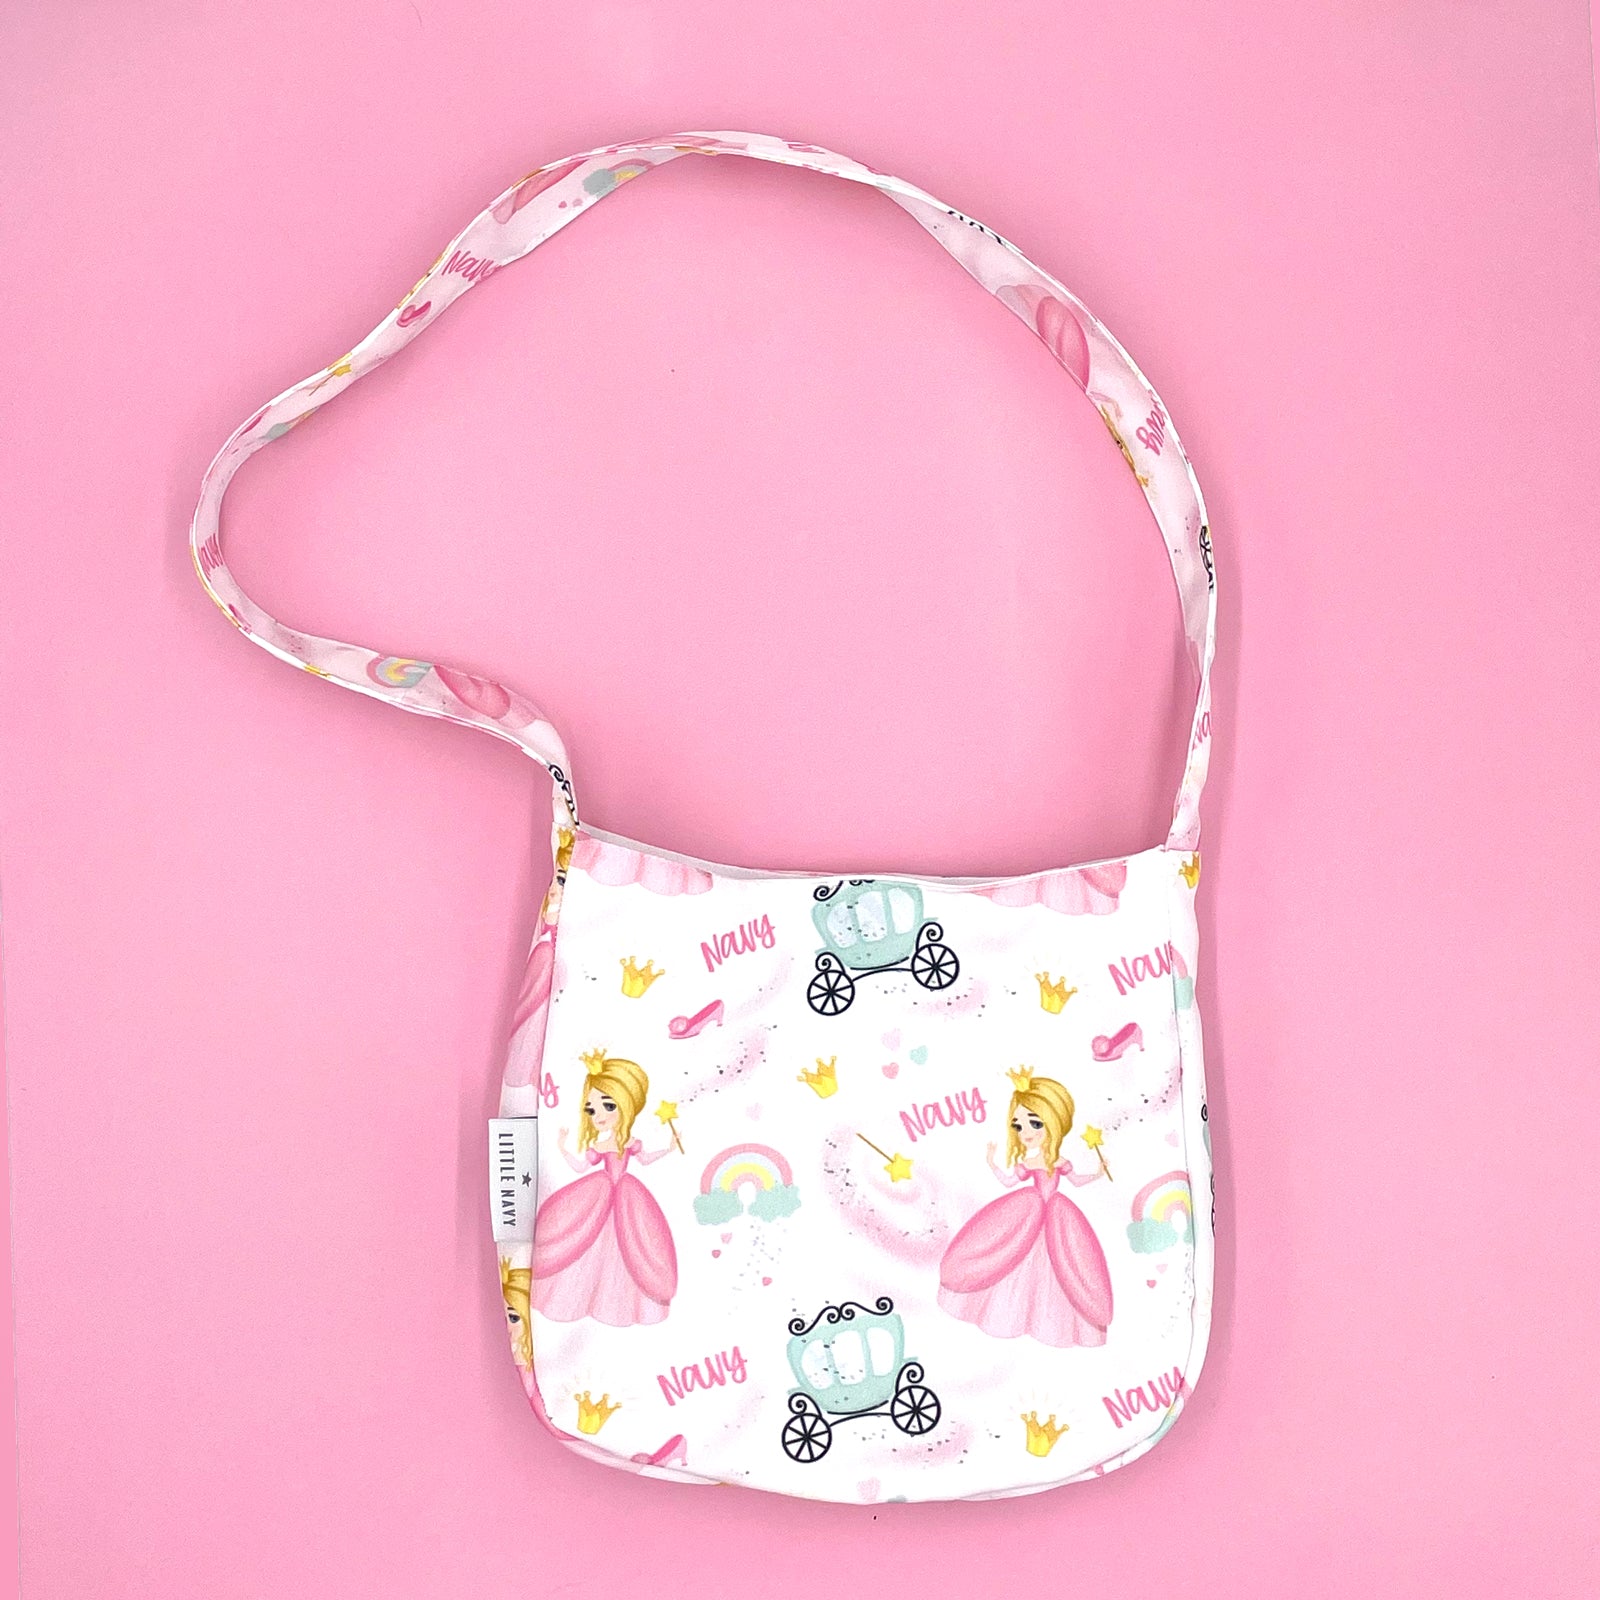 Personalized Kid's Purse